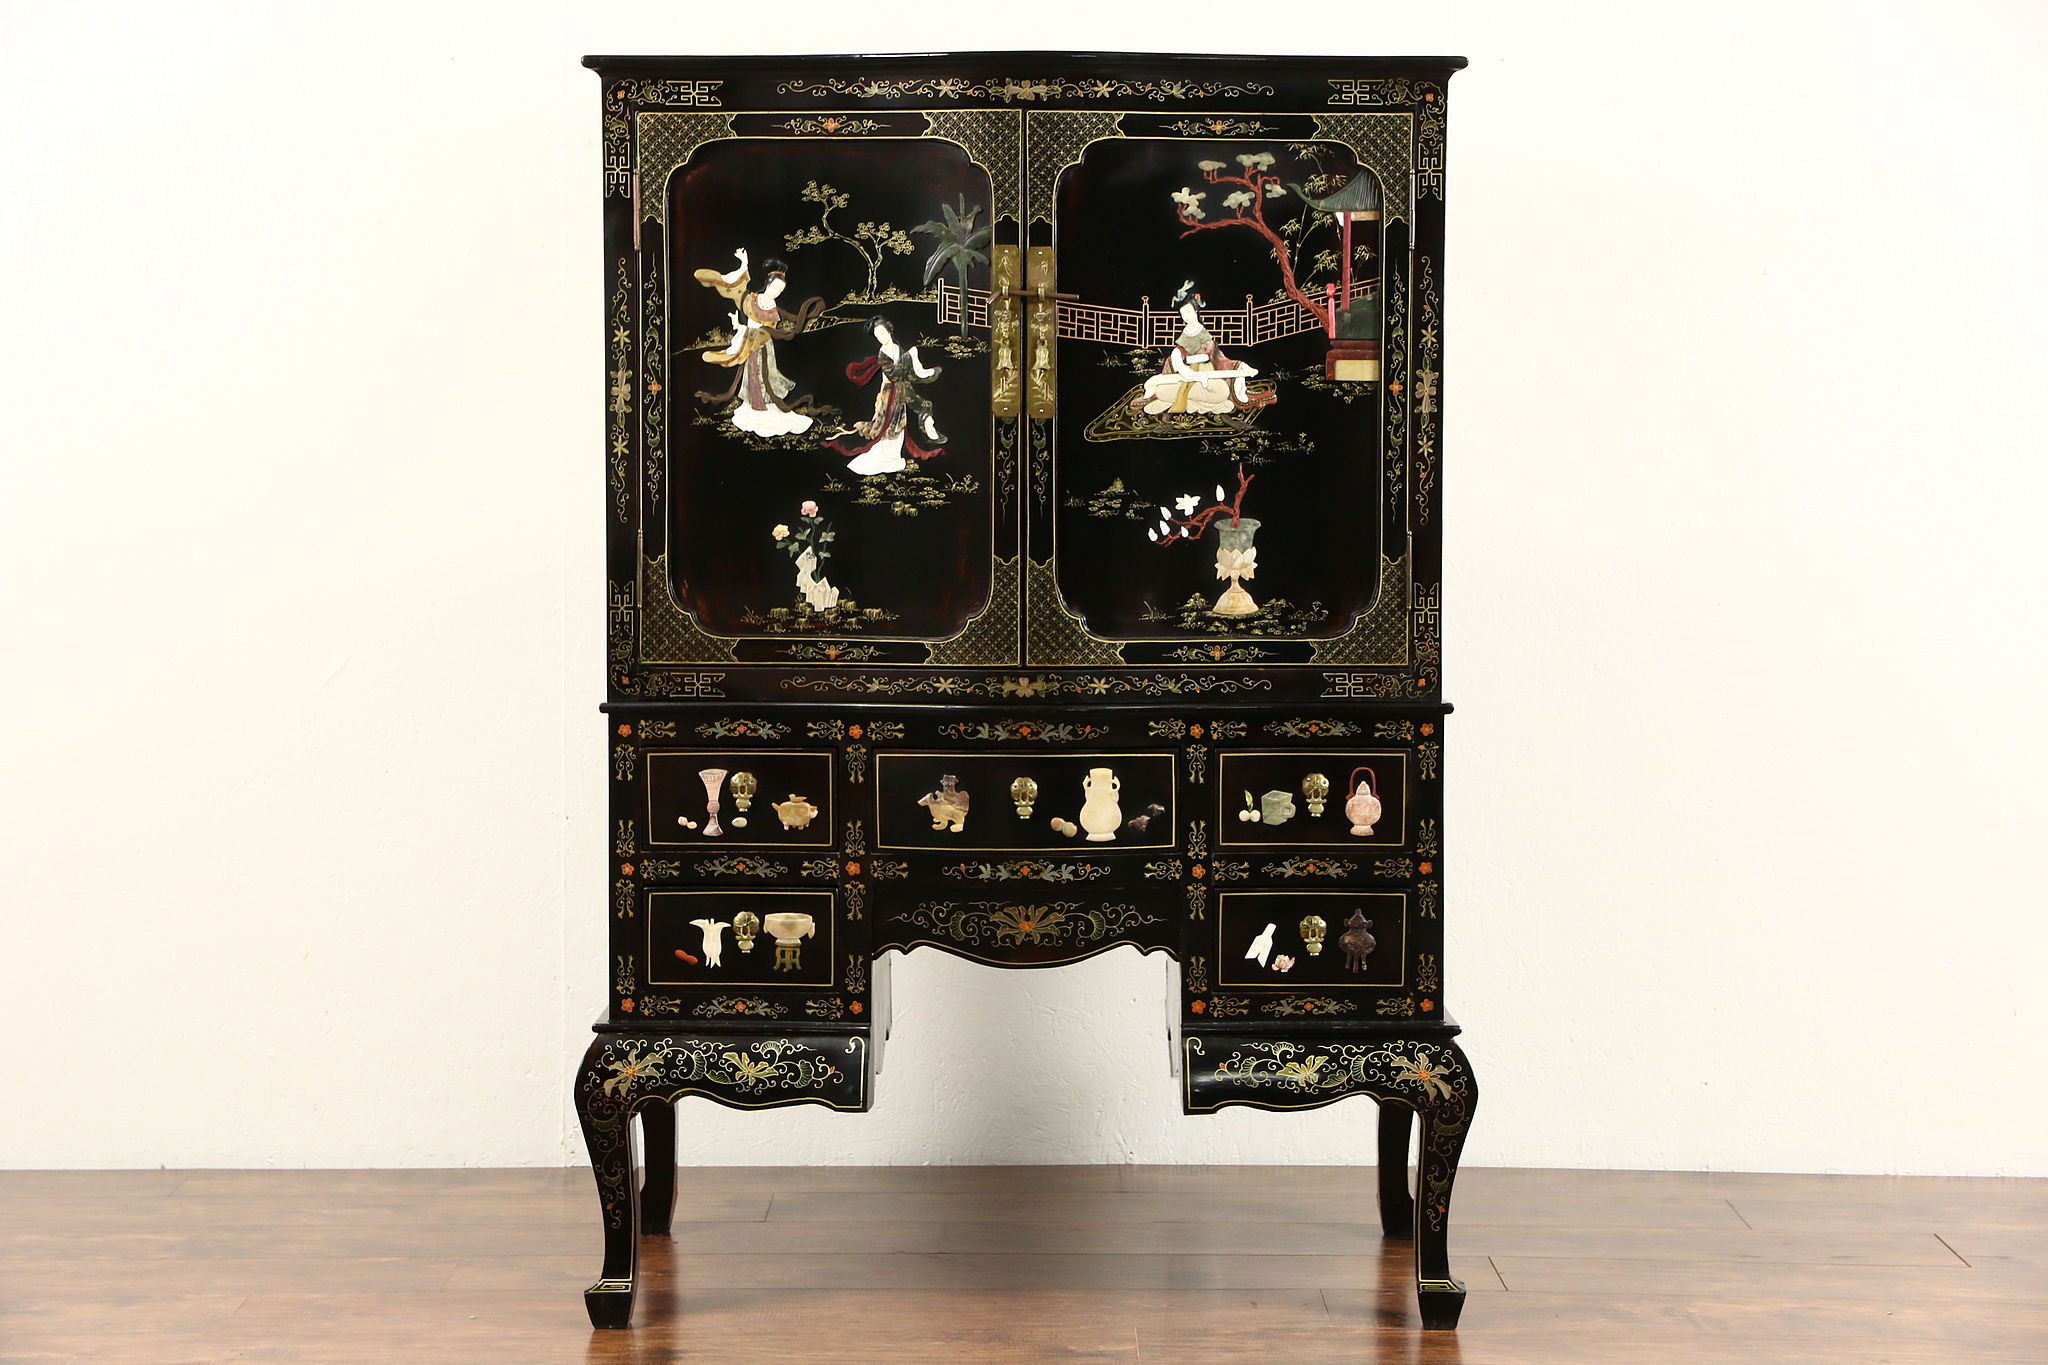 Oriental Asian black Lacquer cabinet Nightstand table